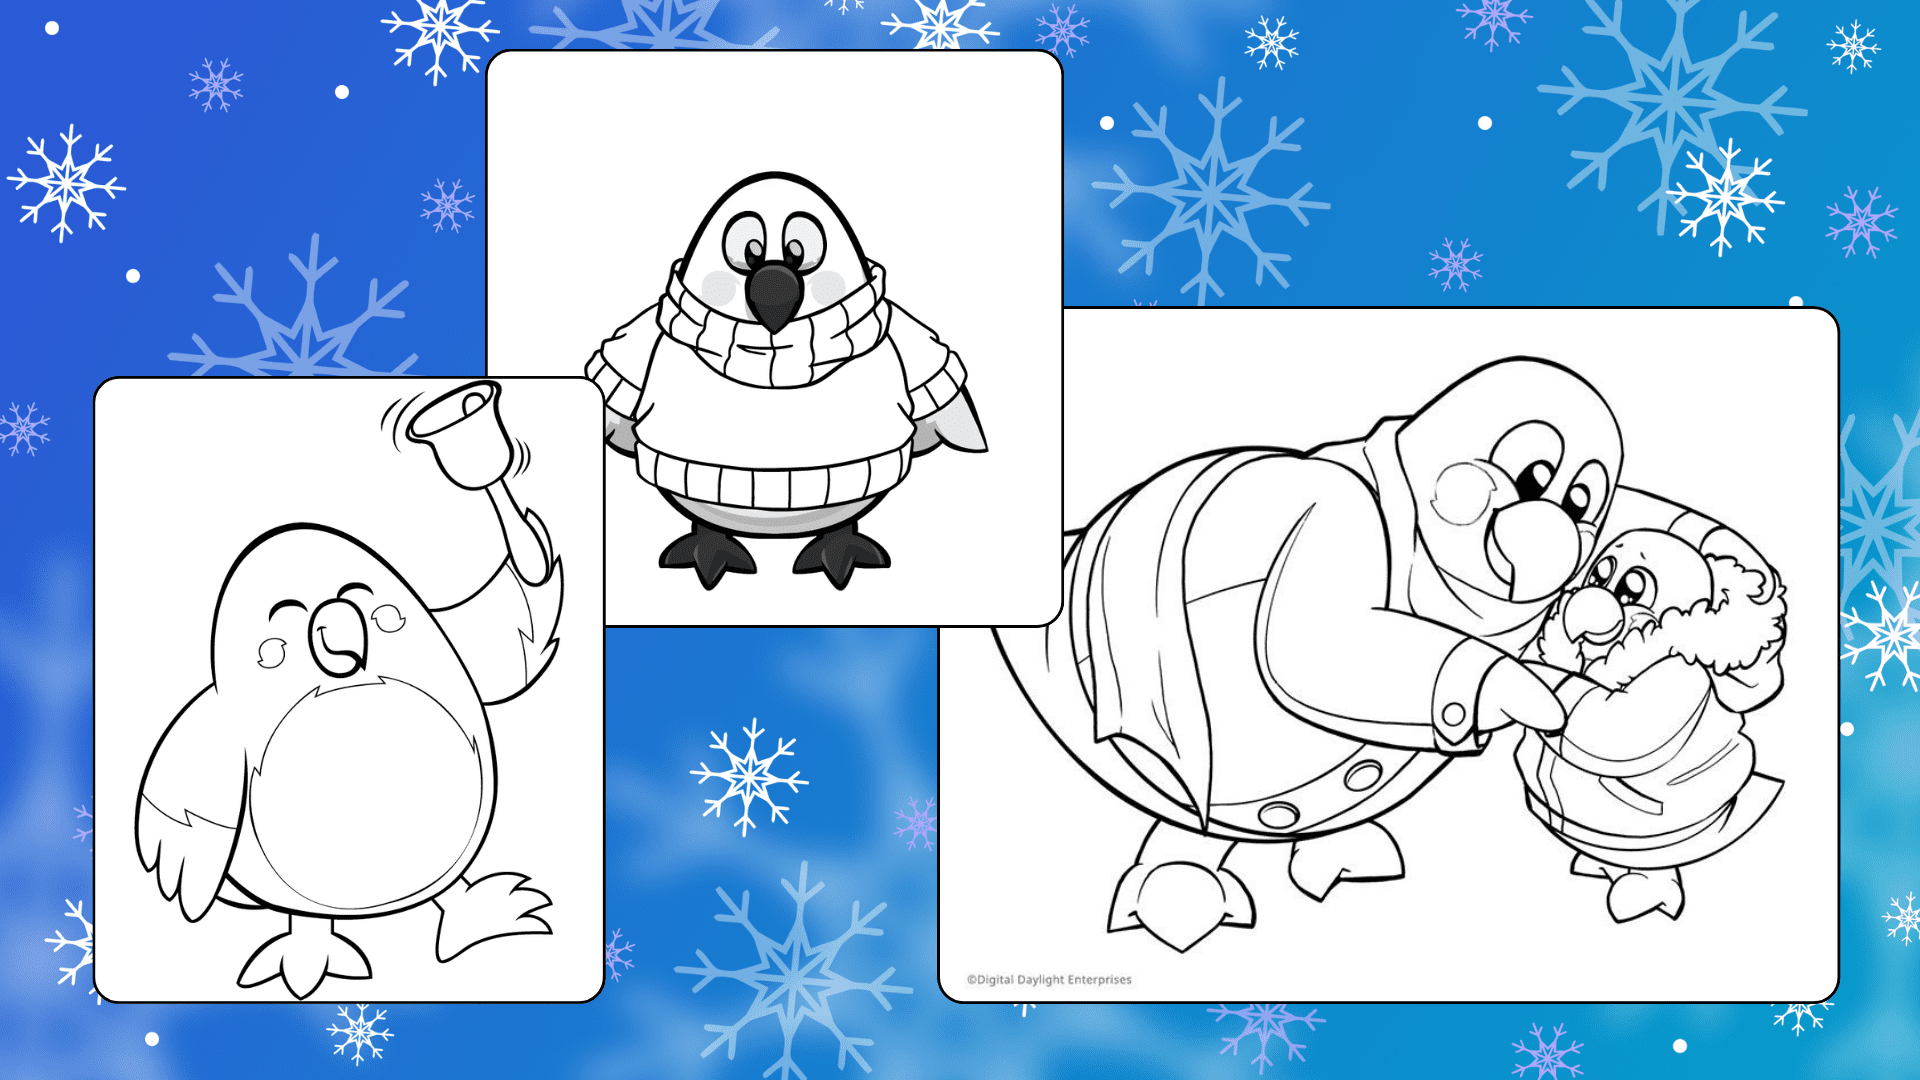 A layout of easy winter coloring pages for kids. The blue background shows white snowflake patterns.